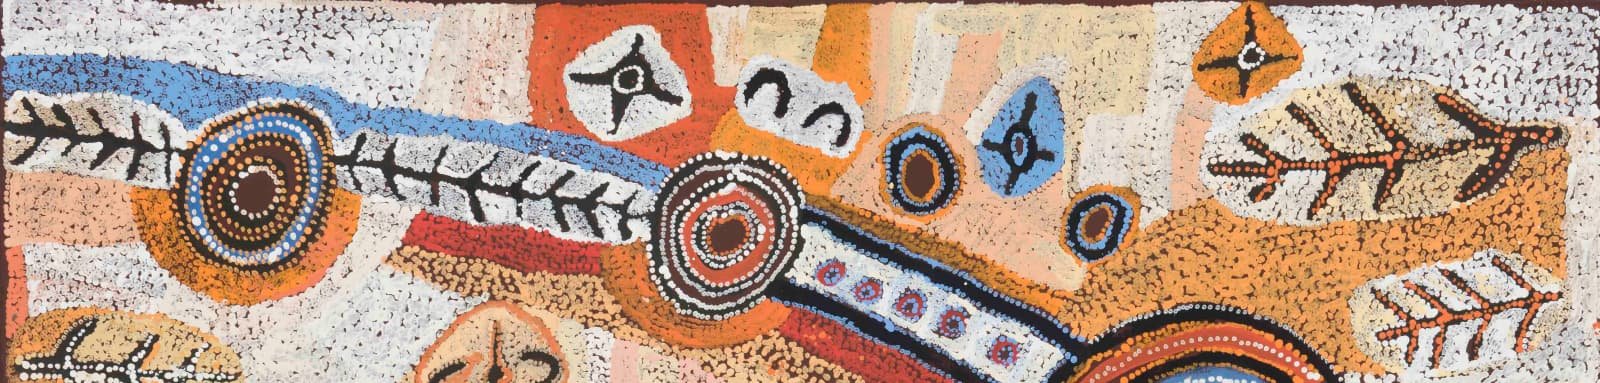 Indigenous art with feather and circle motifs